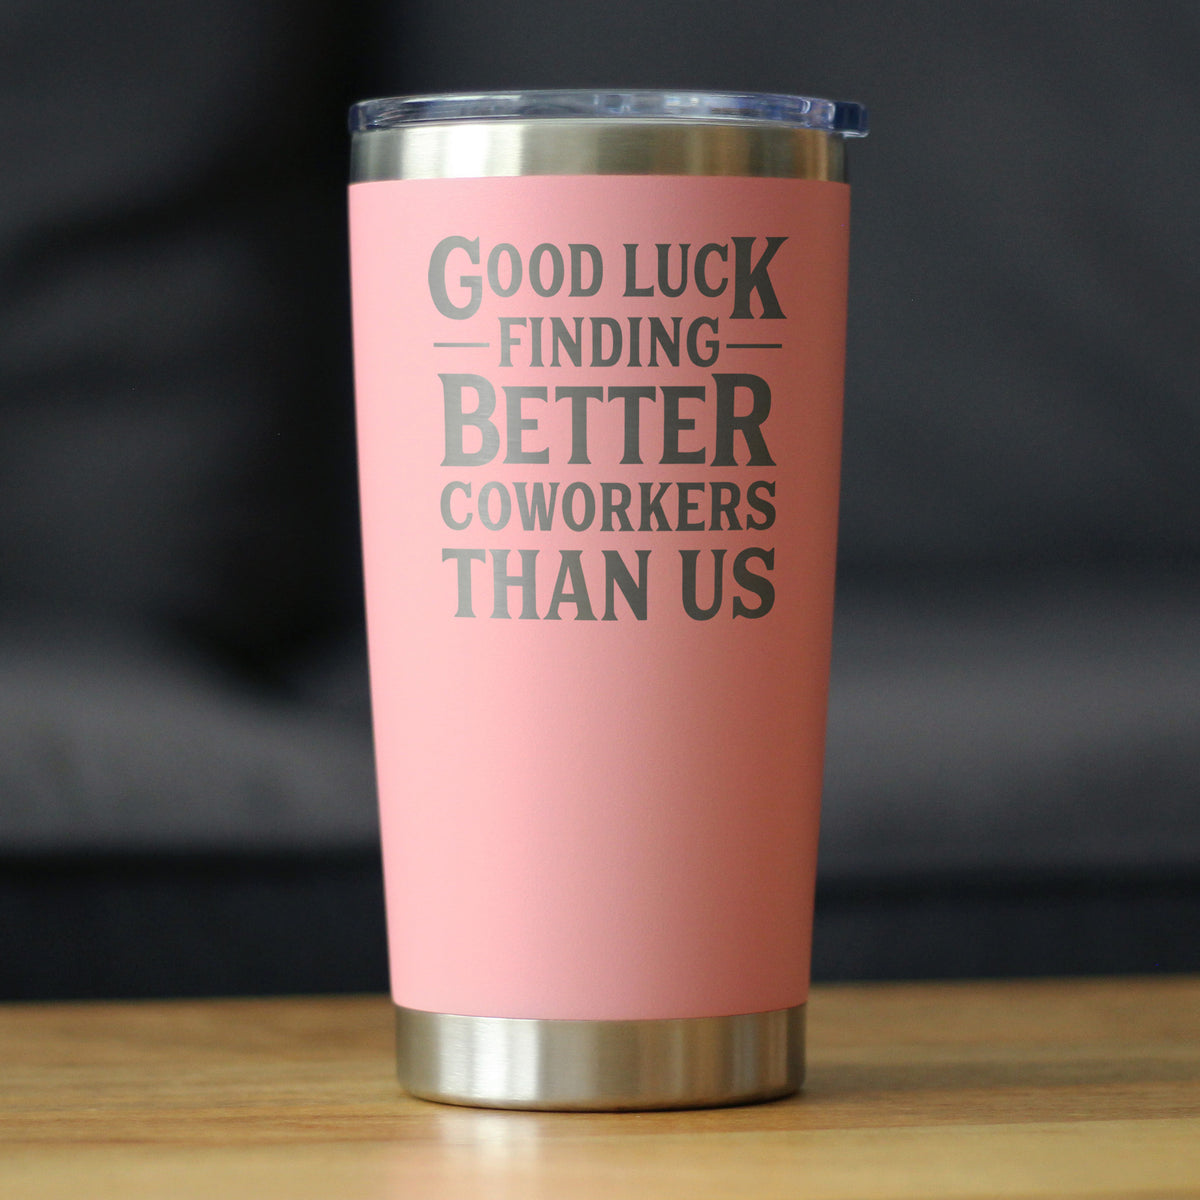 Good Luck Finding Better Coworkers Than Us - Insulated Coffee Tumbler Cup with Sliding Lid - Stainless Steel Insulated Mug - Gift for Coworkers Leaving